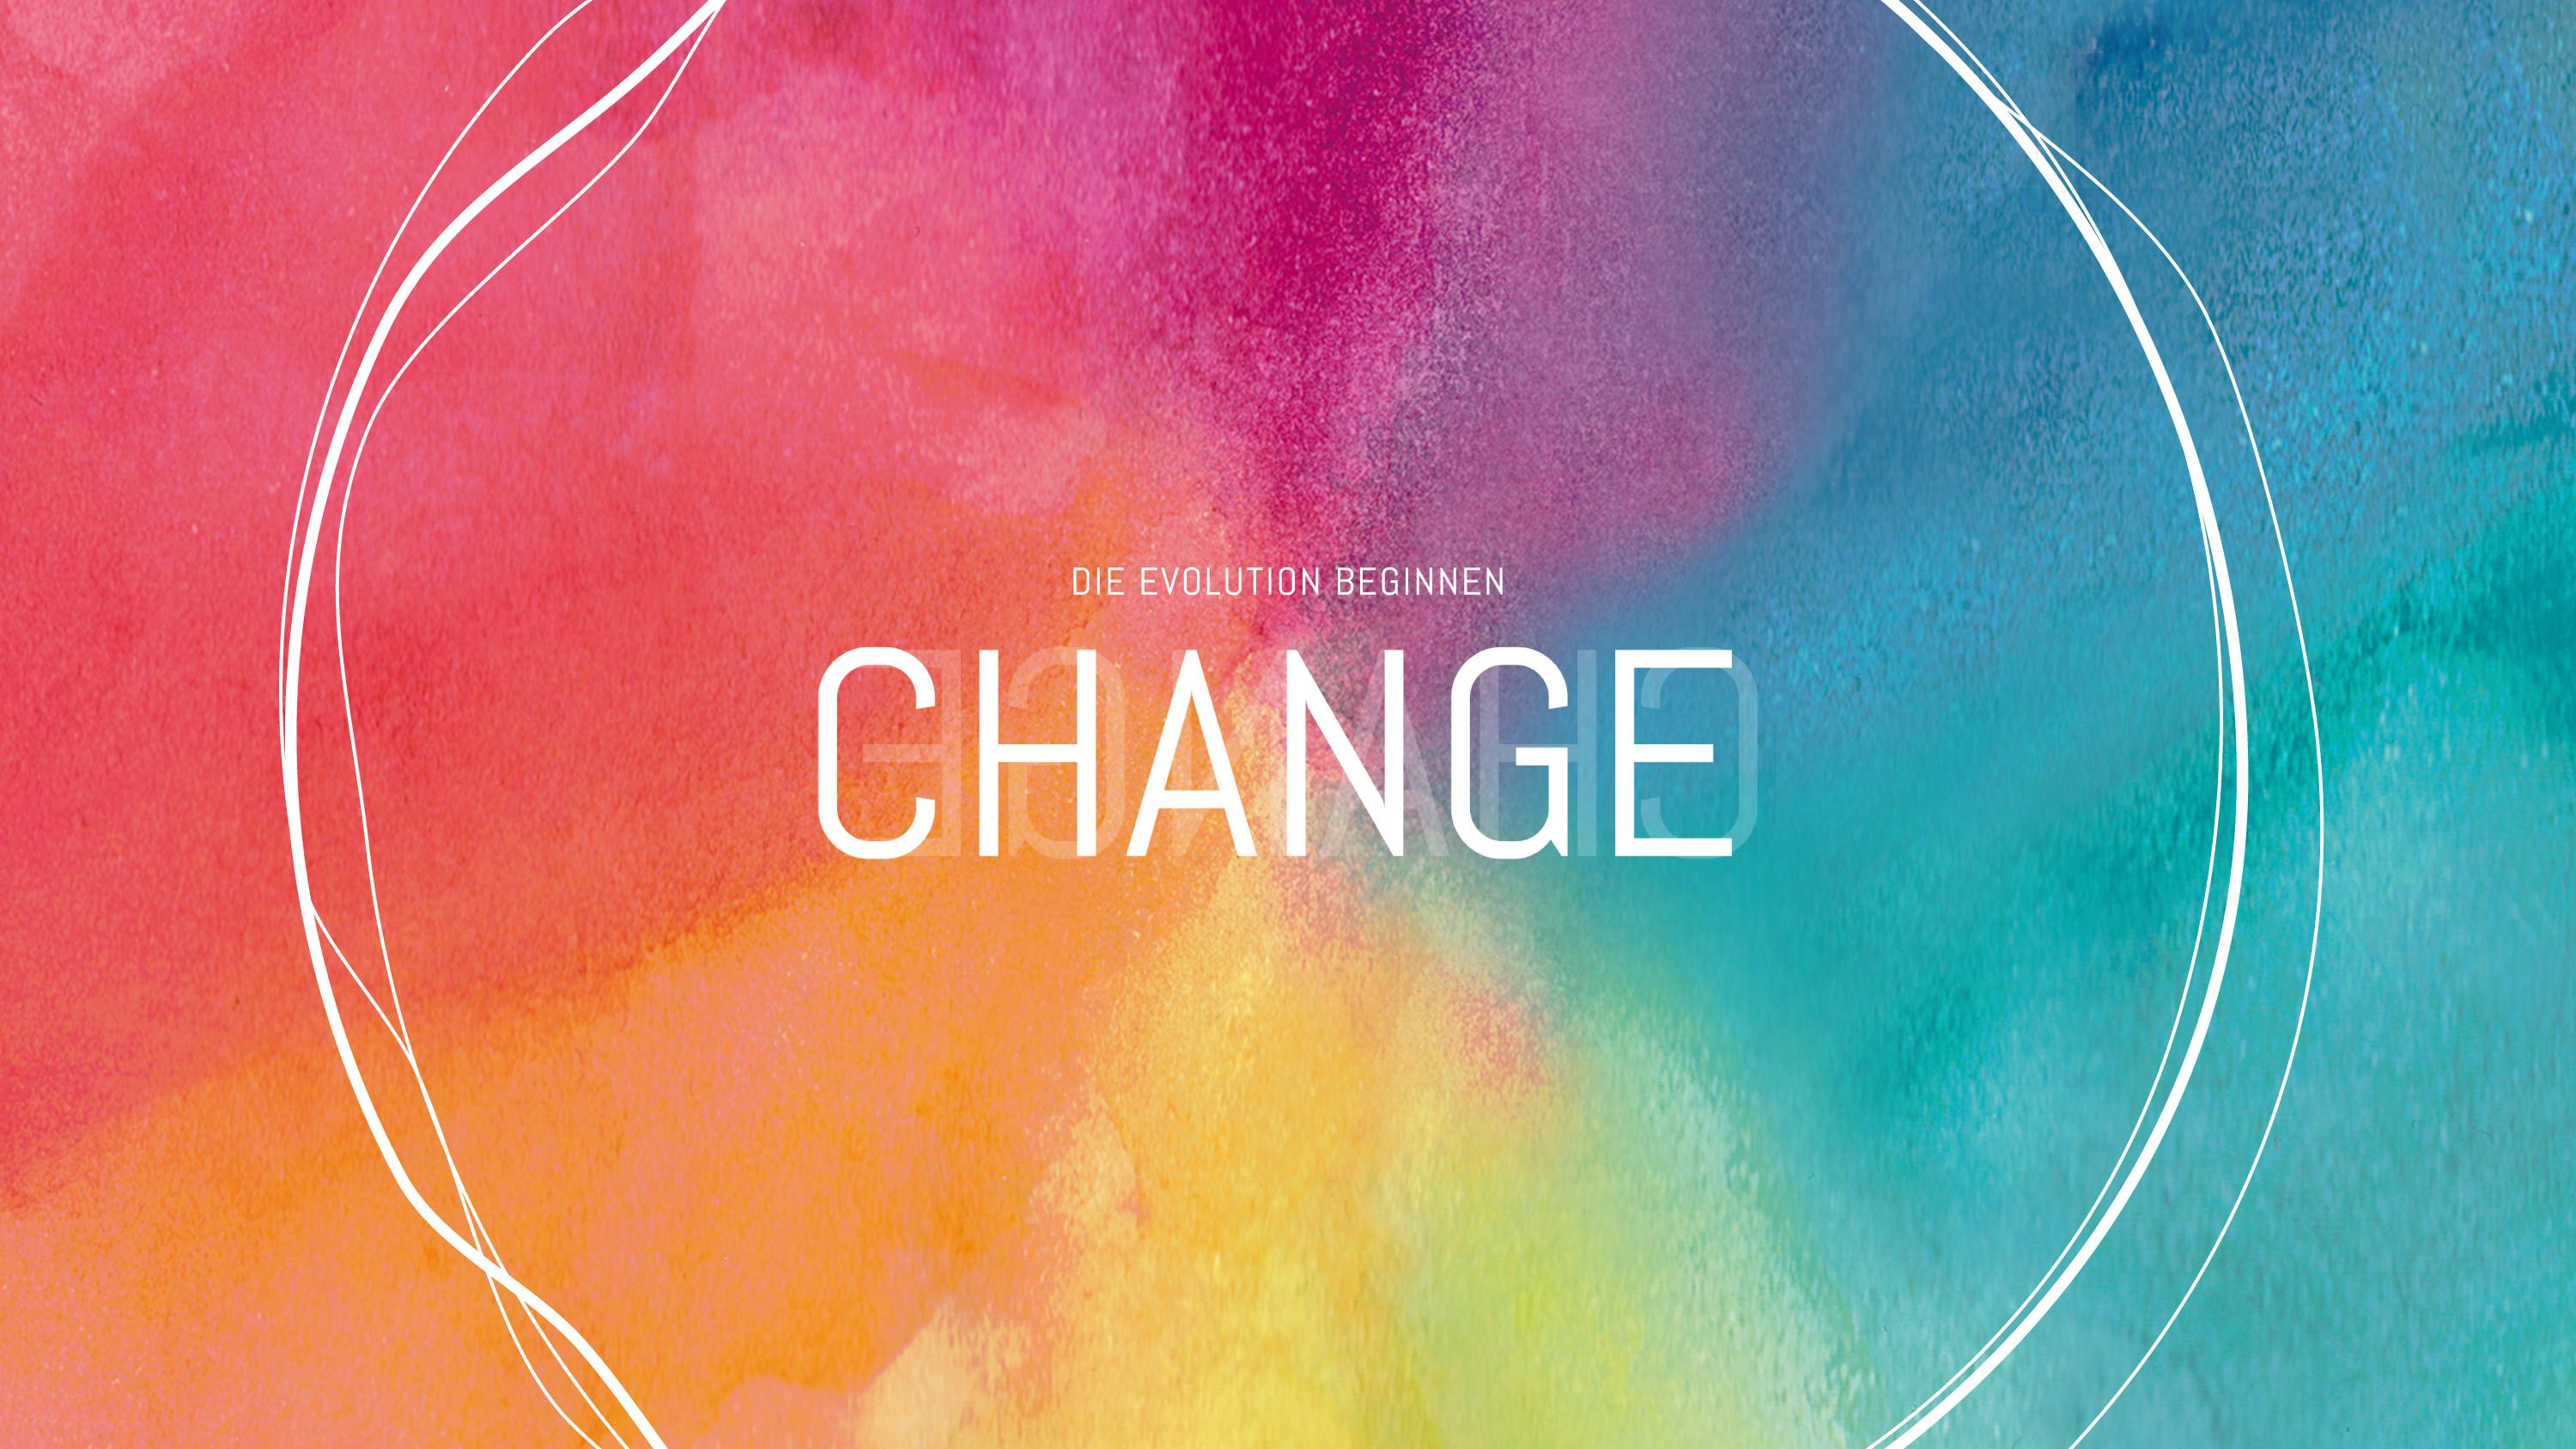 CHANGE Owu! / startup from Offenbach a. Main / Background